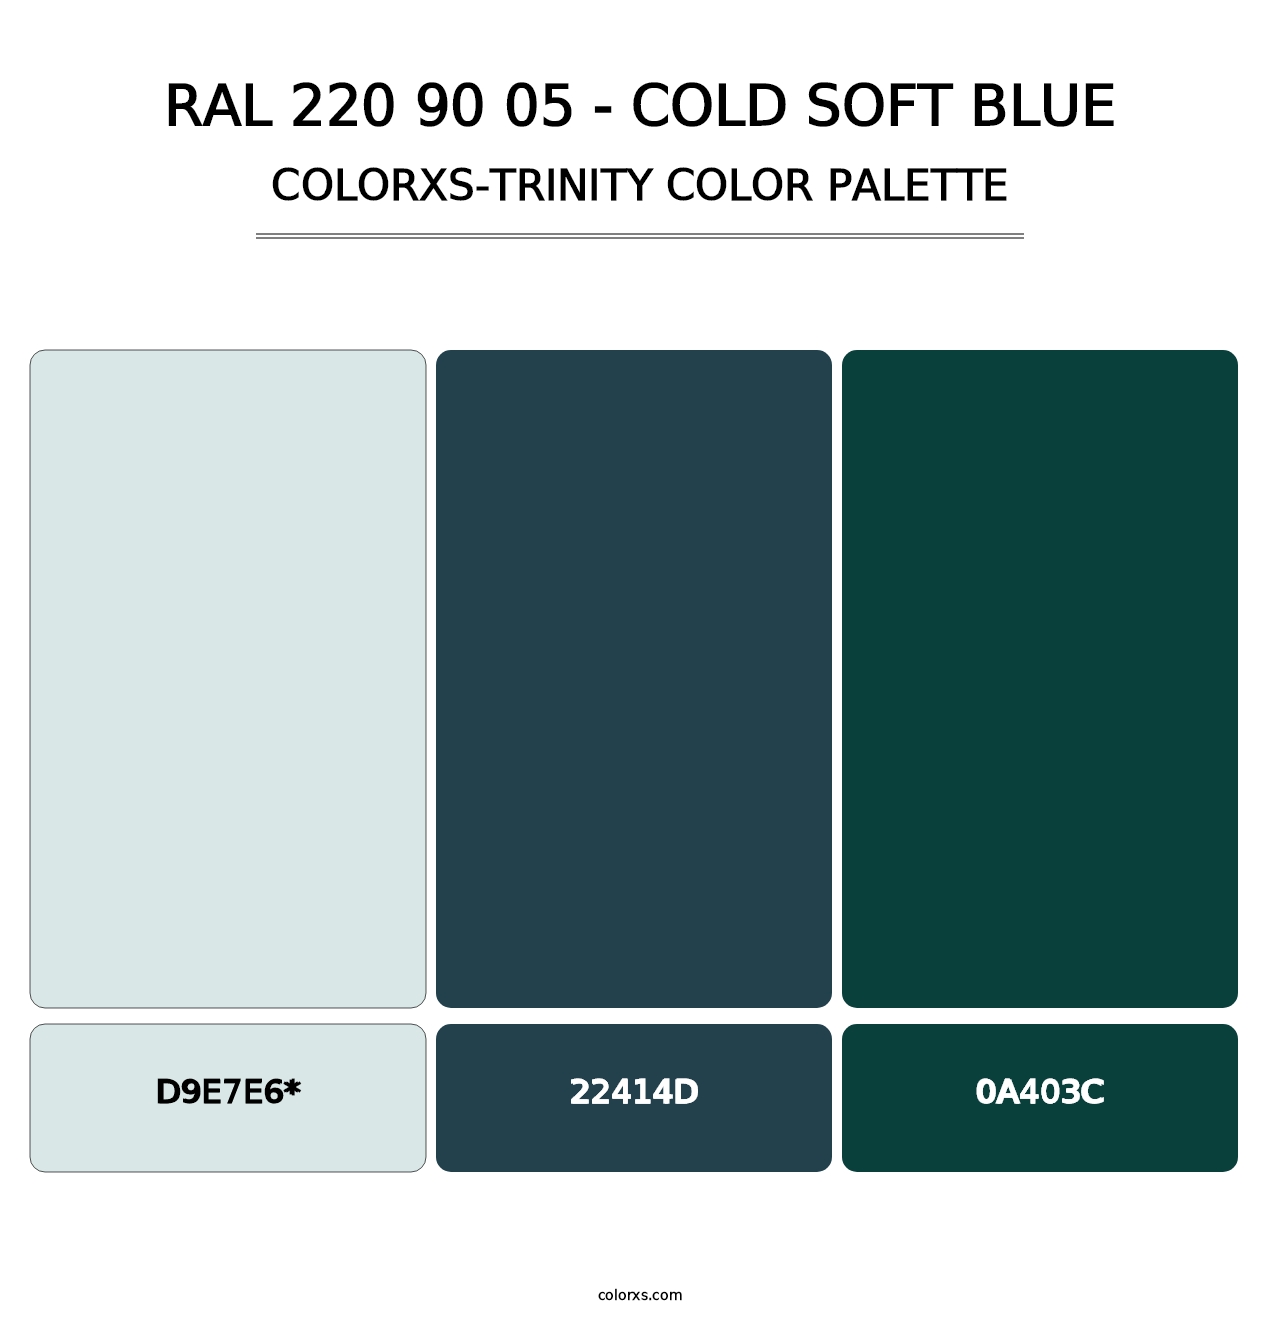 RAL 220 90 05 - Cold Soft Blue - Colorxs Trinity Palette